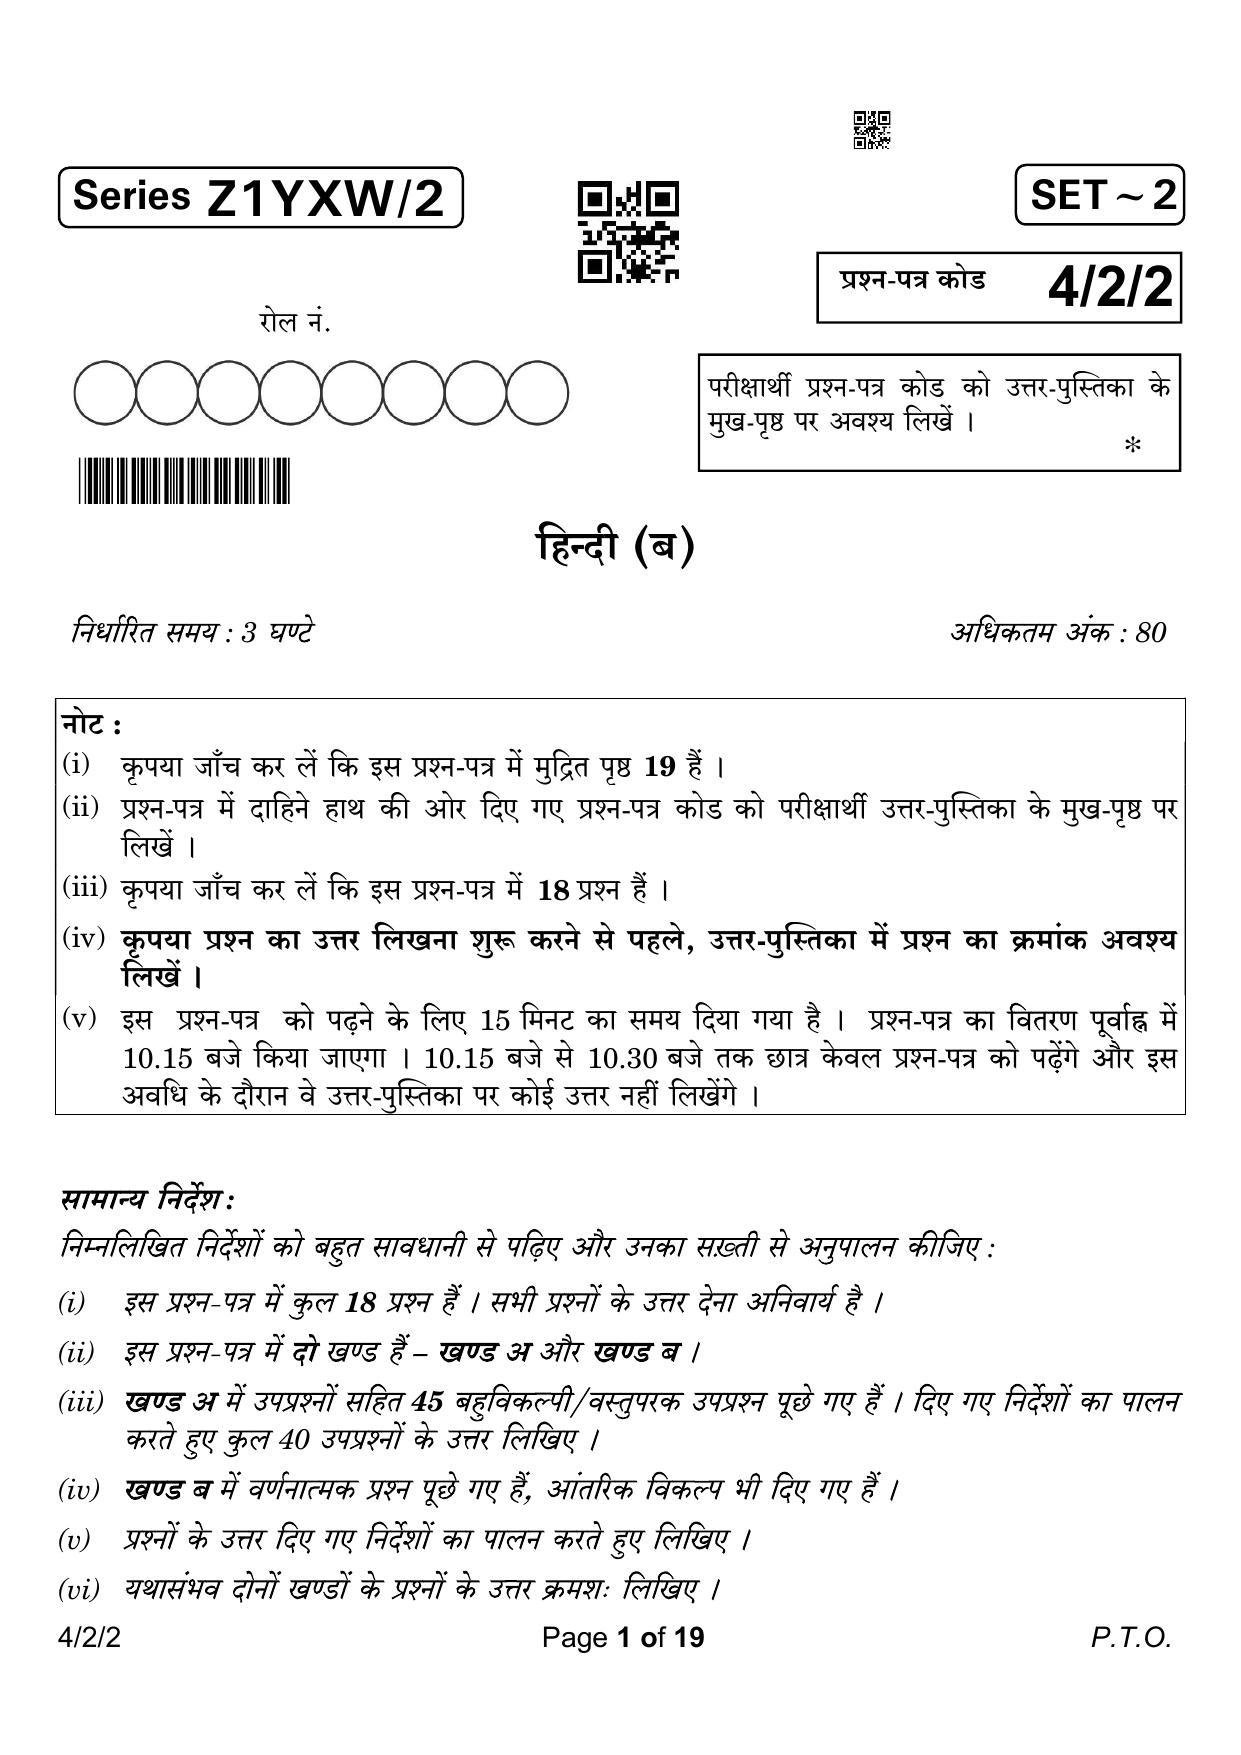 CBSE Class 10 4-2-2 Hindi B 2023 Question Paper - Page 1